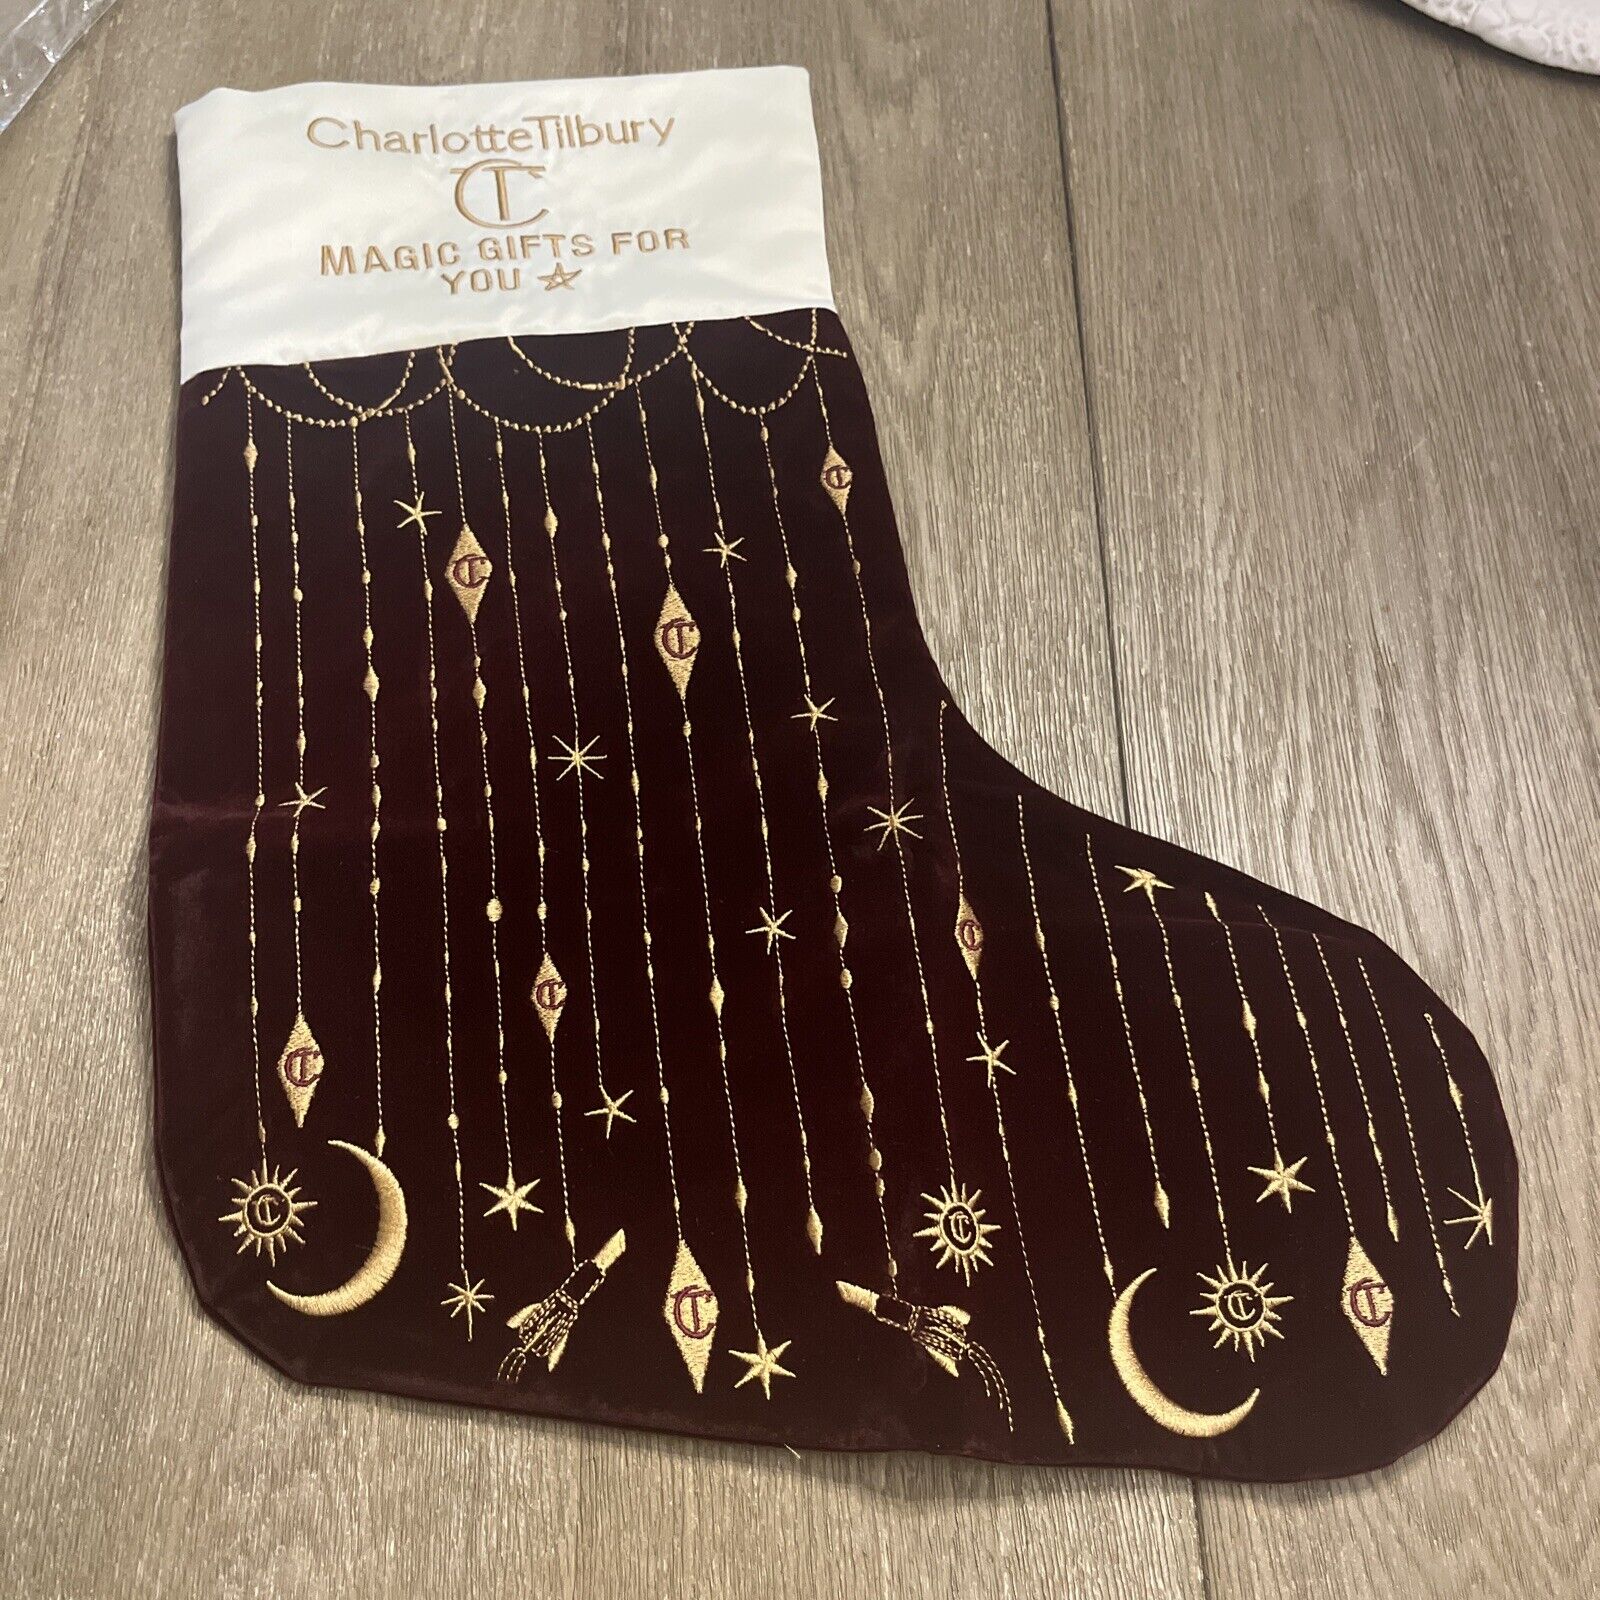 New Charlotte Tilbury Magic Gifts For You Limited Edition Christmas Stocking